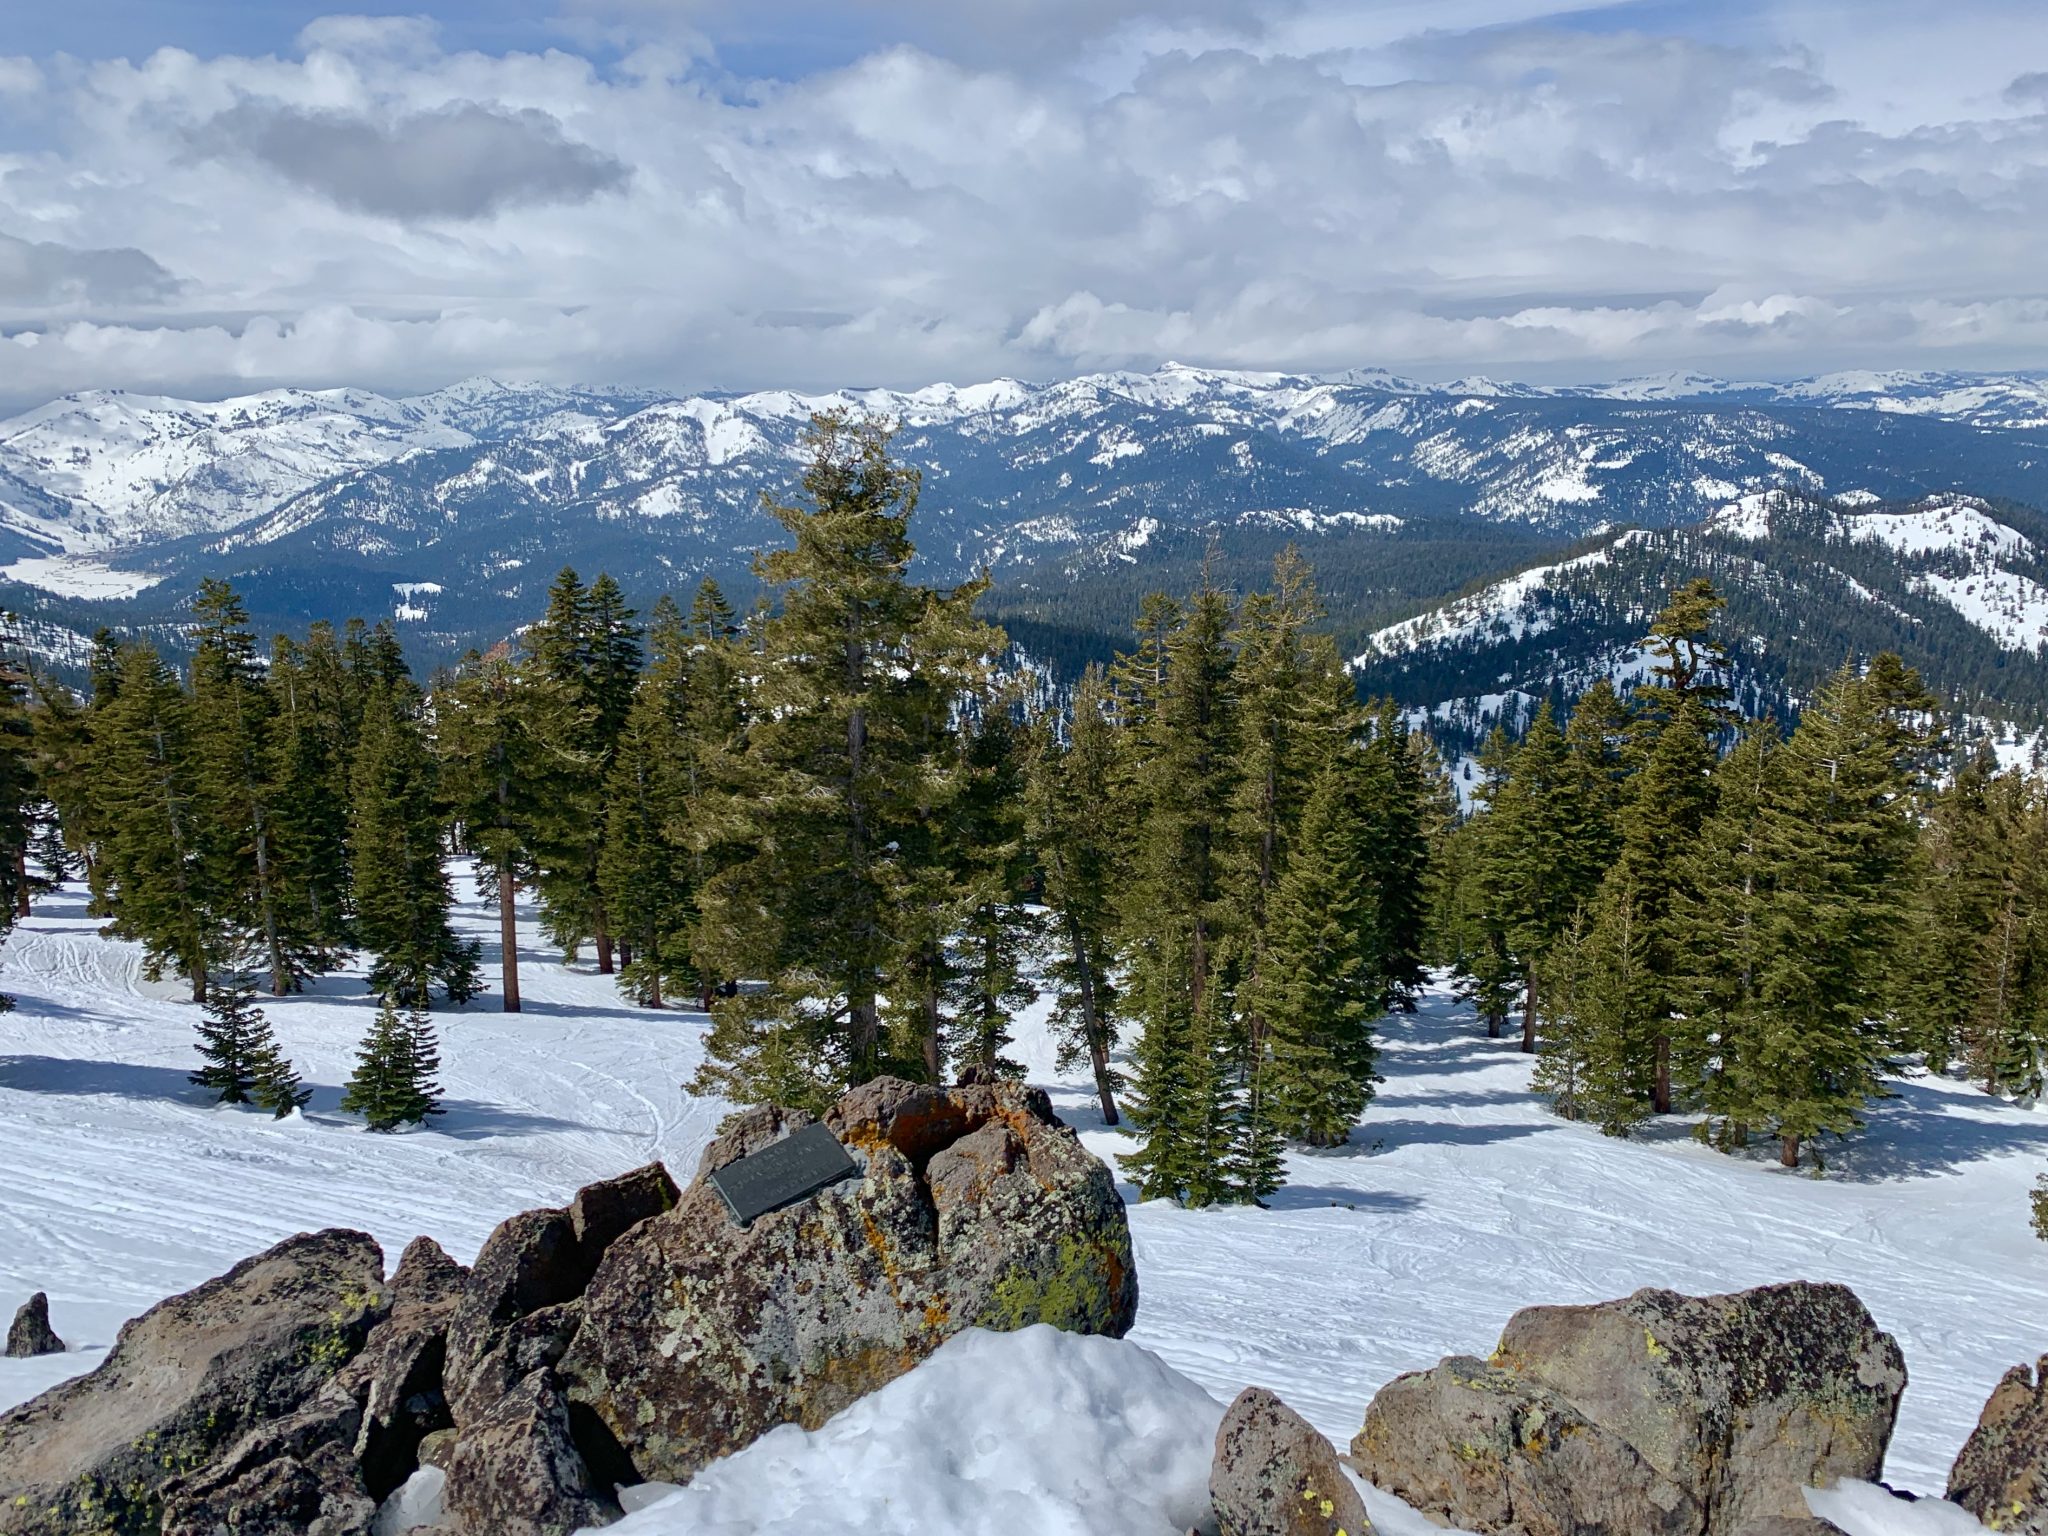 Catch these beautiful views of snowcapped mountains during spring skiing at Lake Tahoe's Northstar resort.